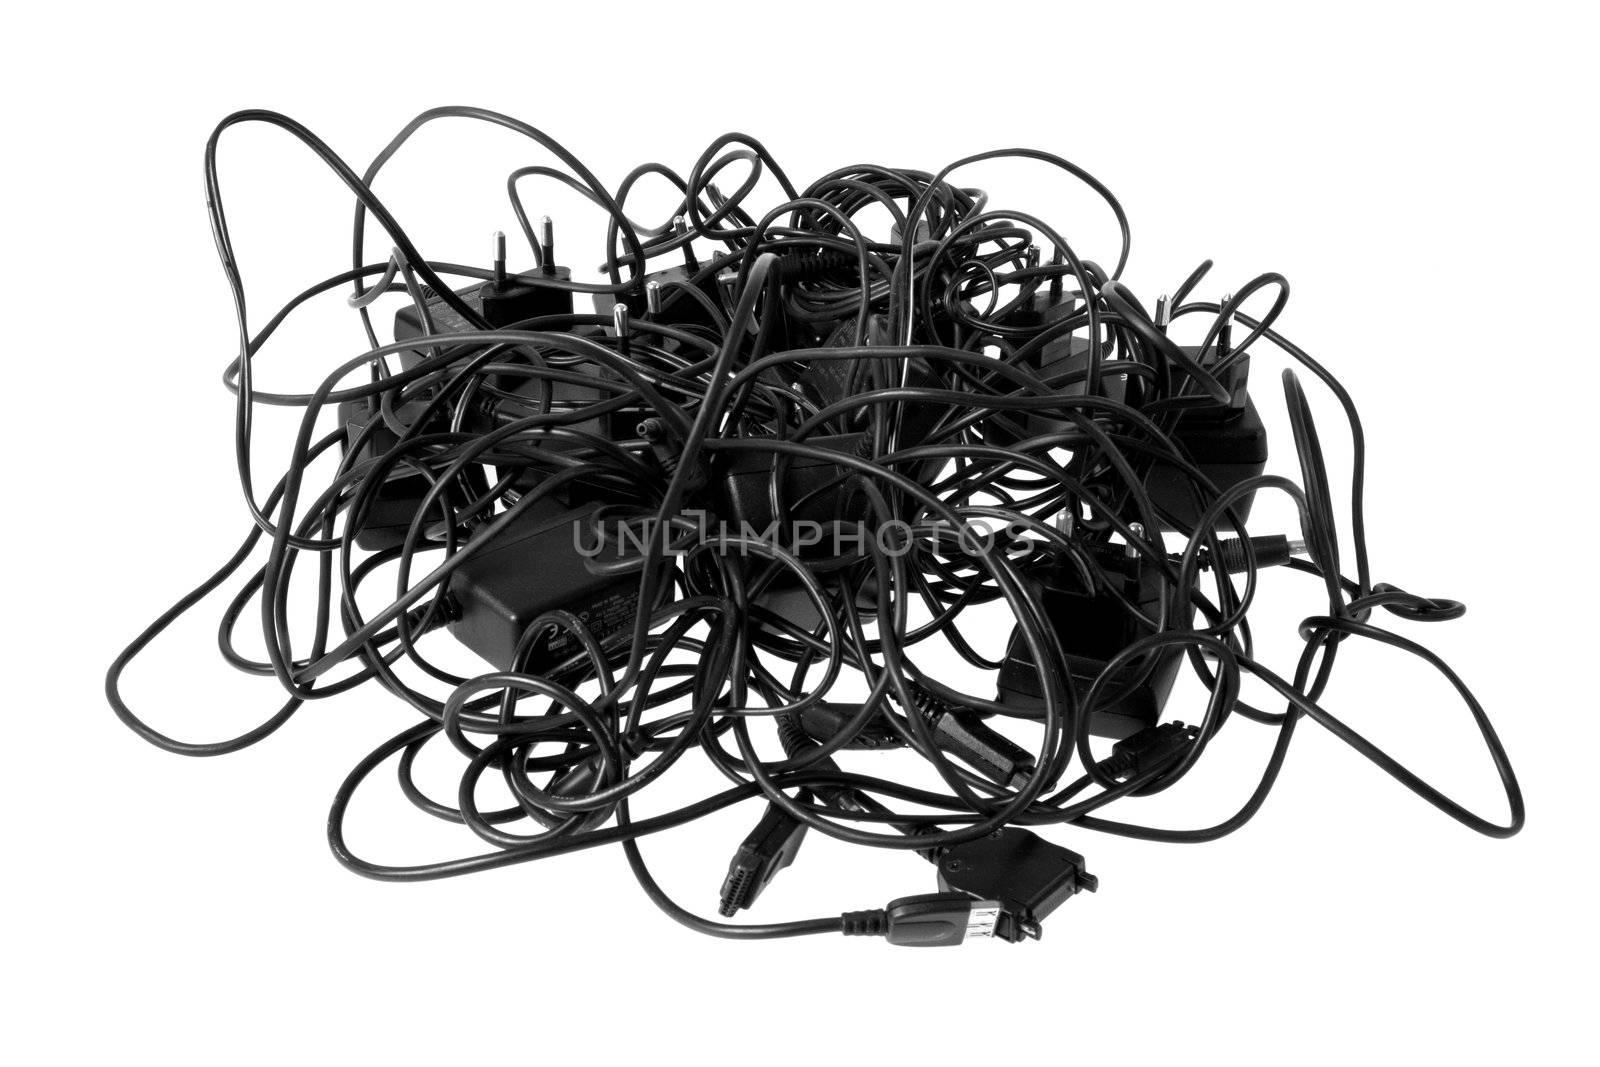 Tangled cables and connectors illustrating complex problems and obstacles.